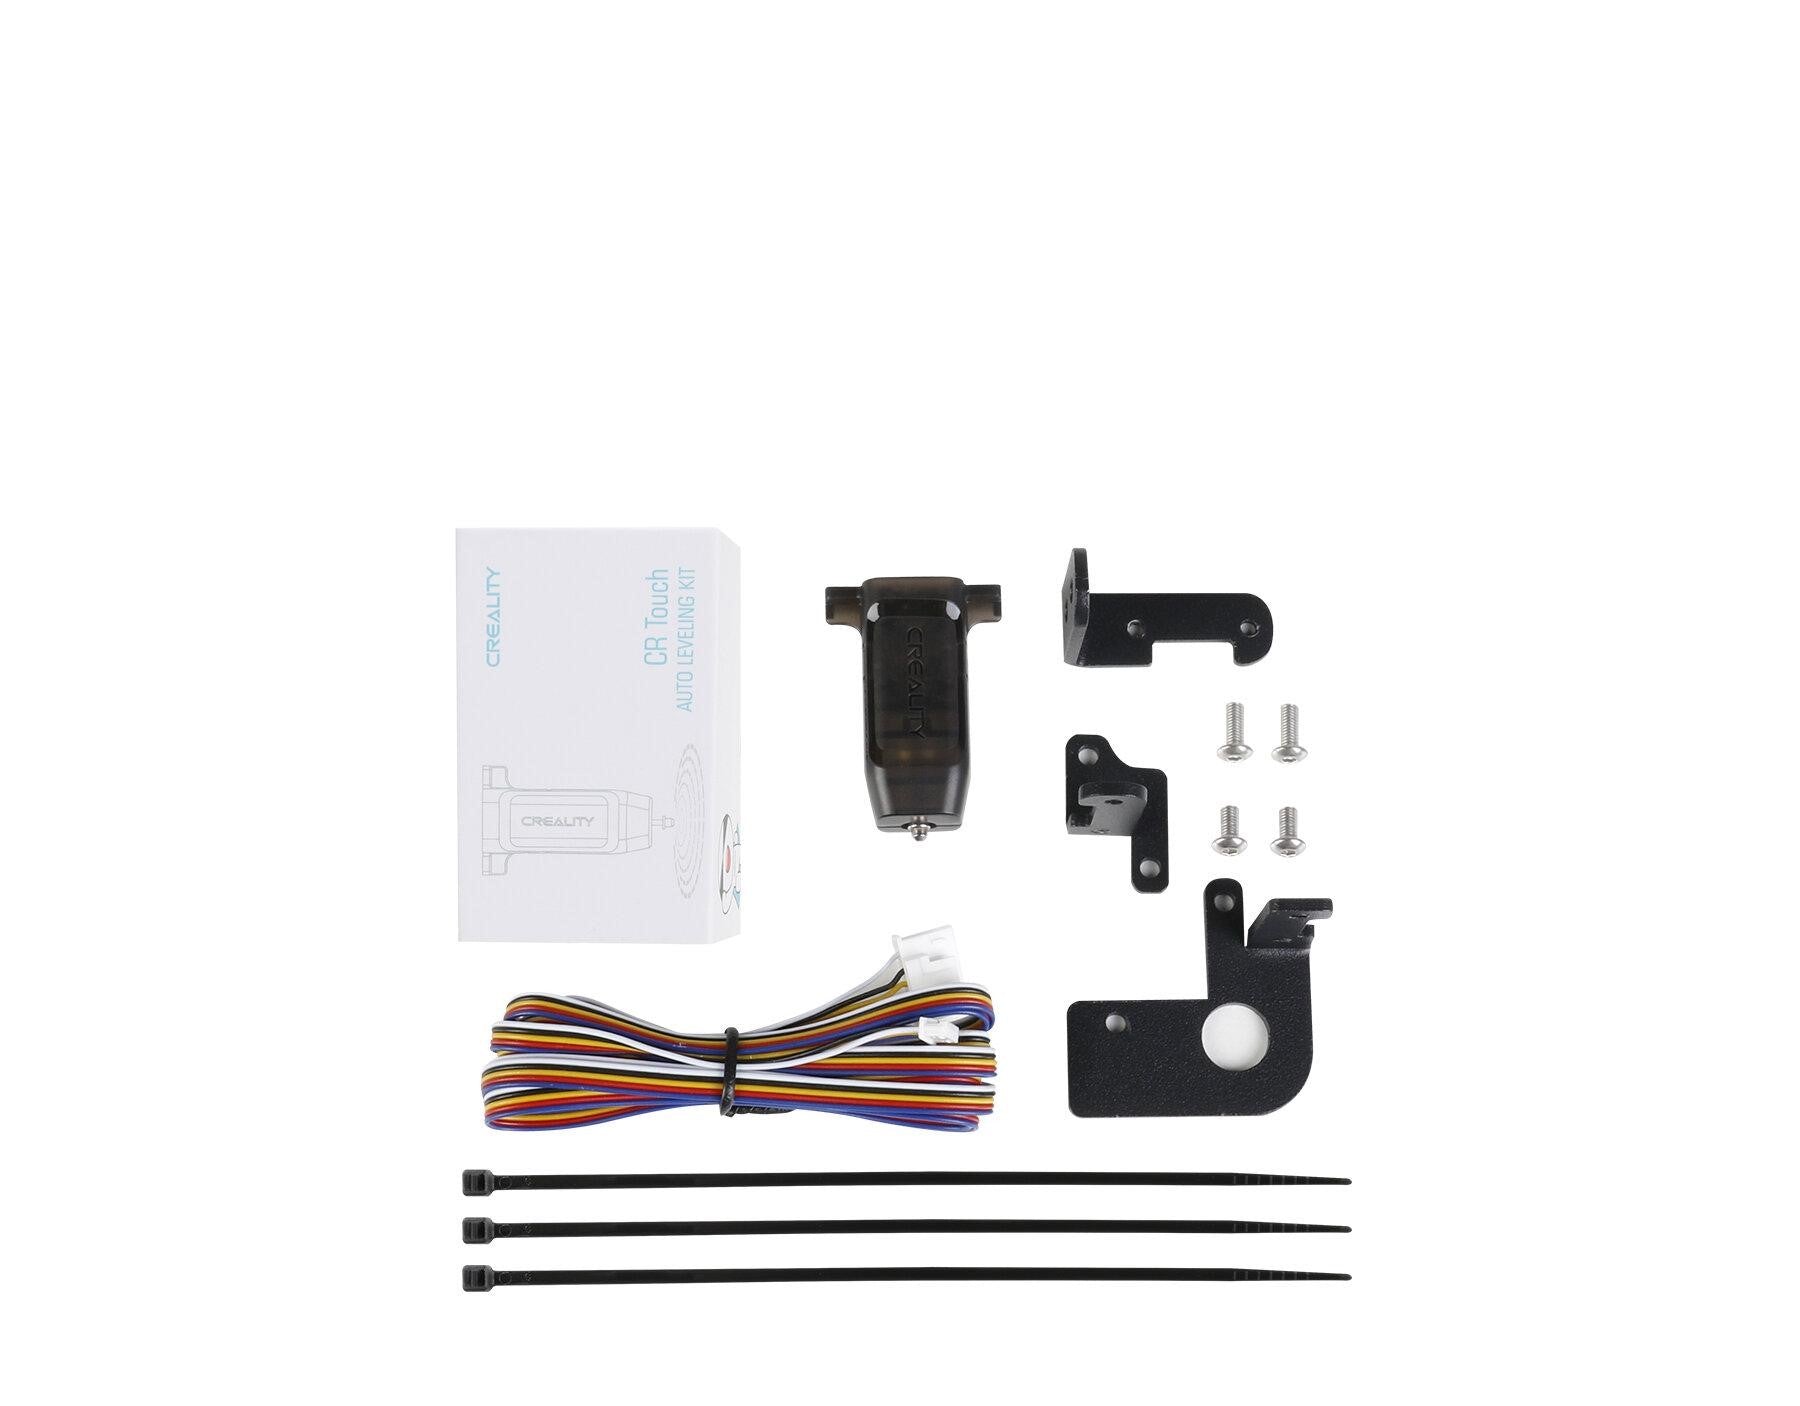 3D Printer Auto Bed Leveling Sensor Kits - BLTouch / CR Touch / 3D Touch